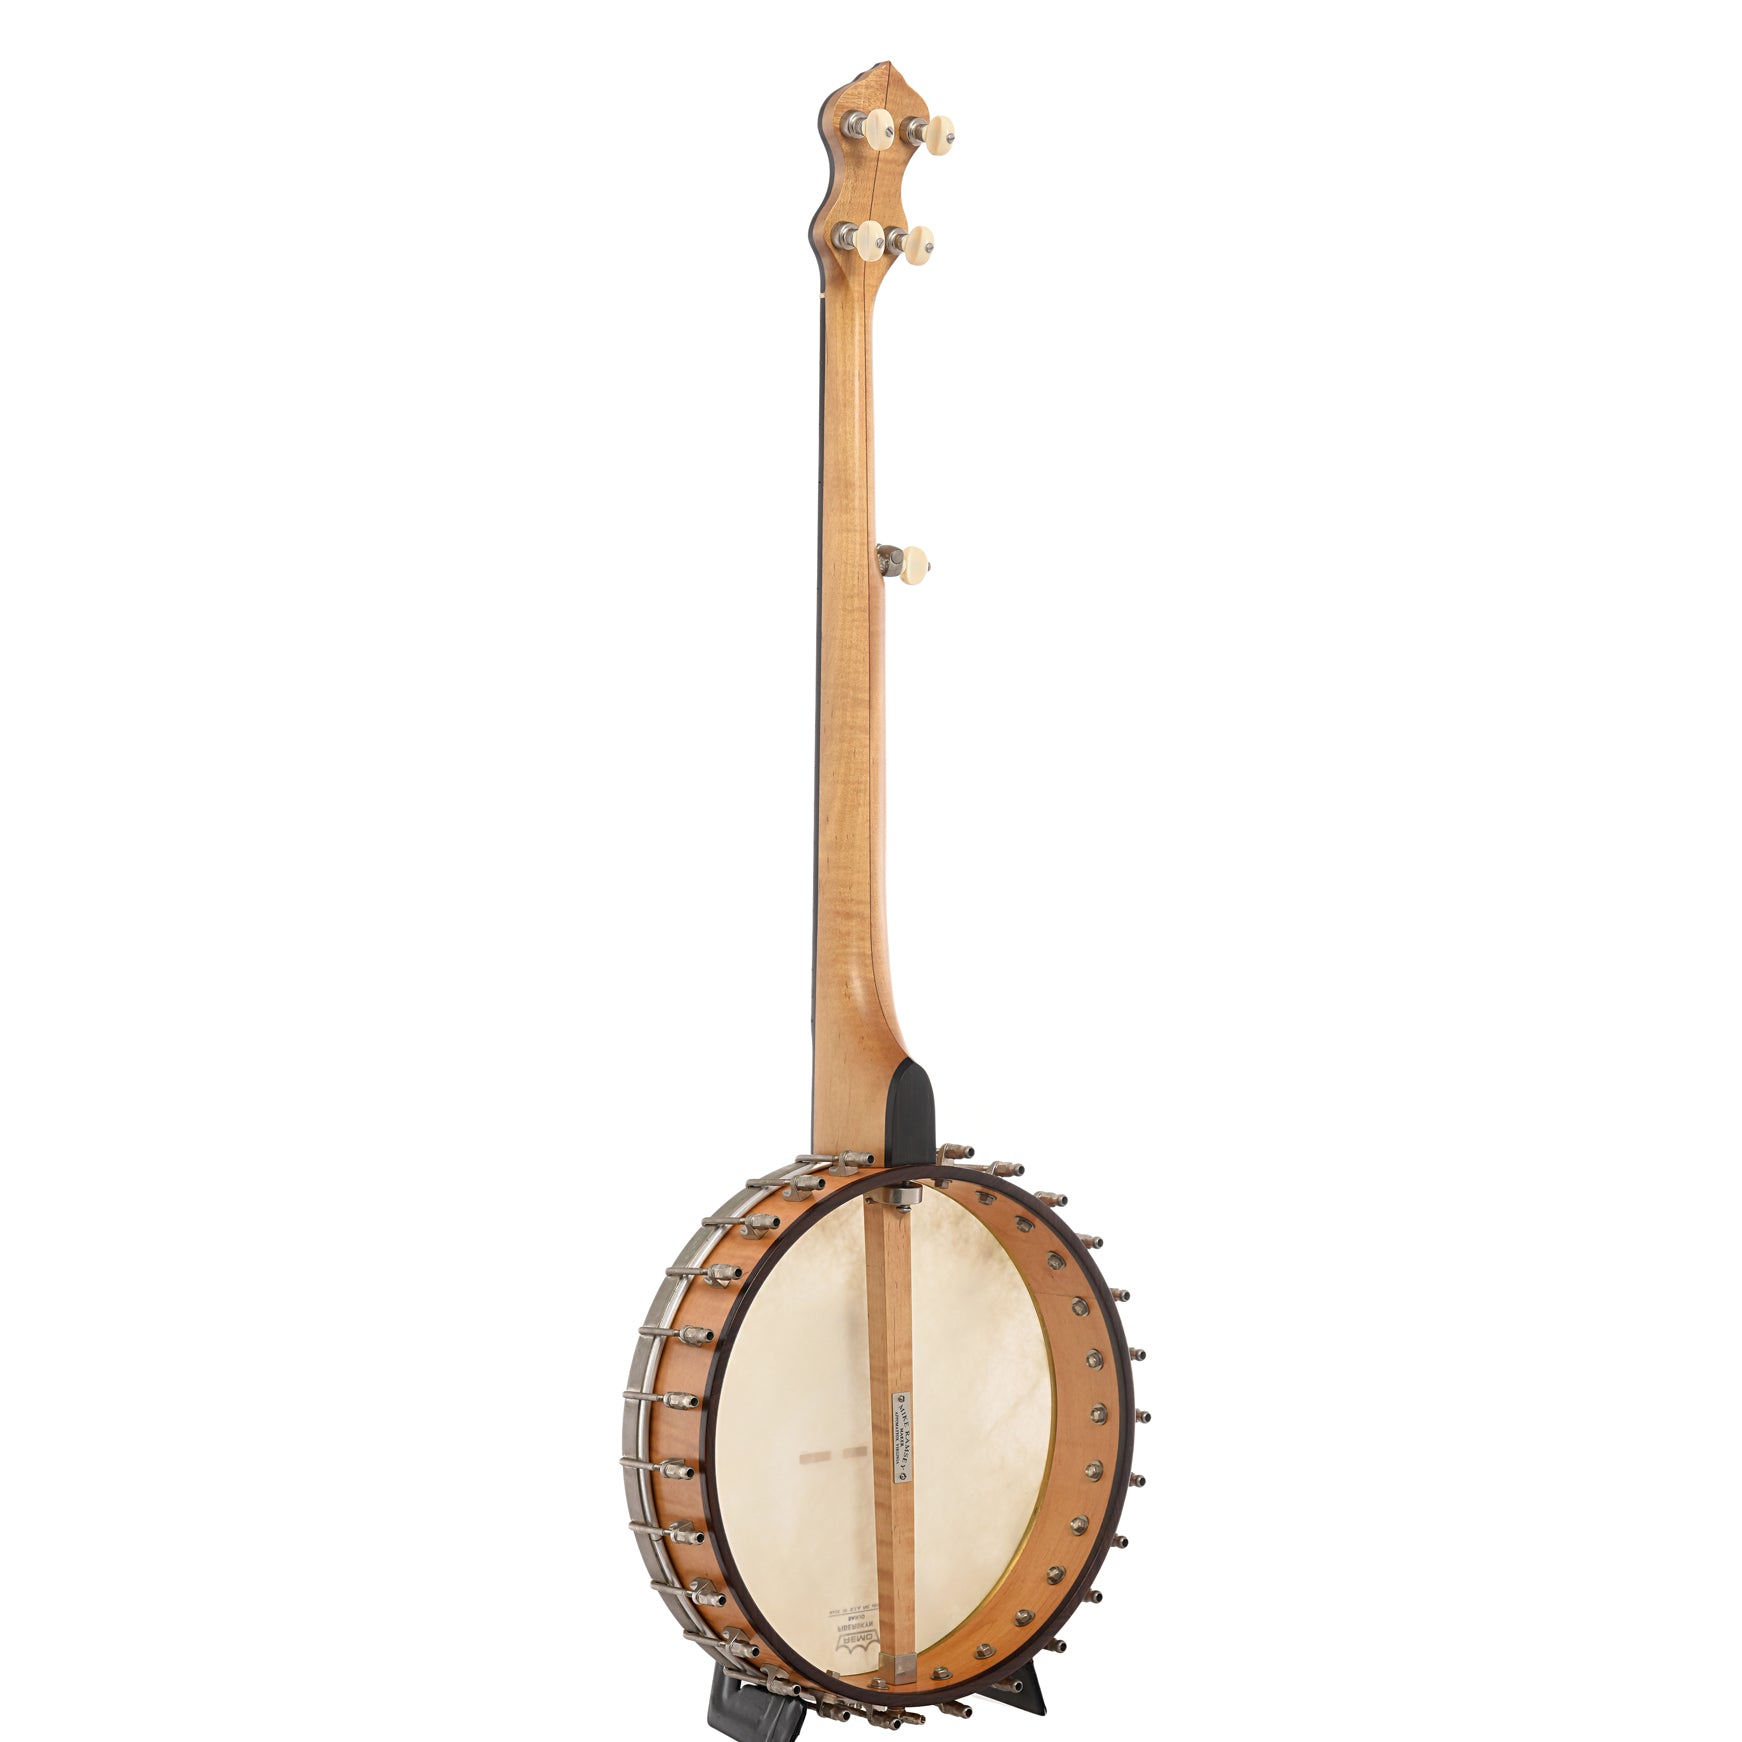 Full back and side of Chanterelle Maple Special 12" Open Back Banjo